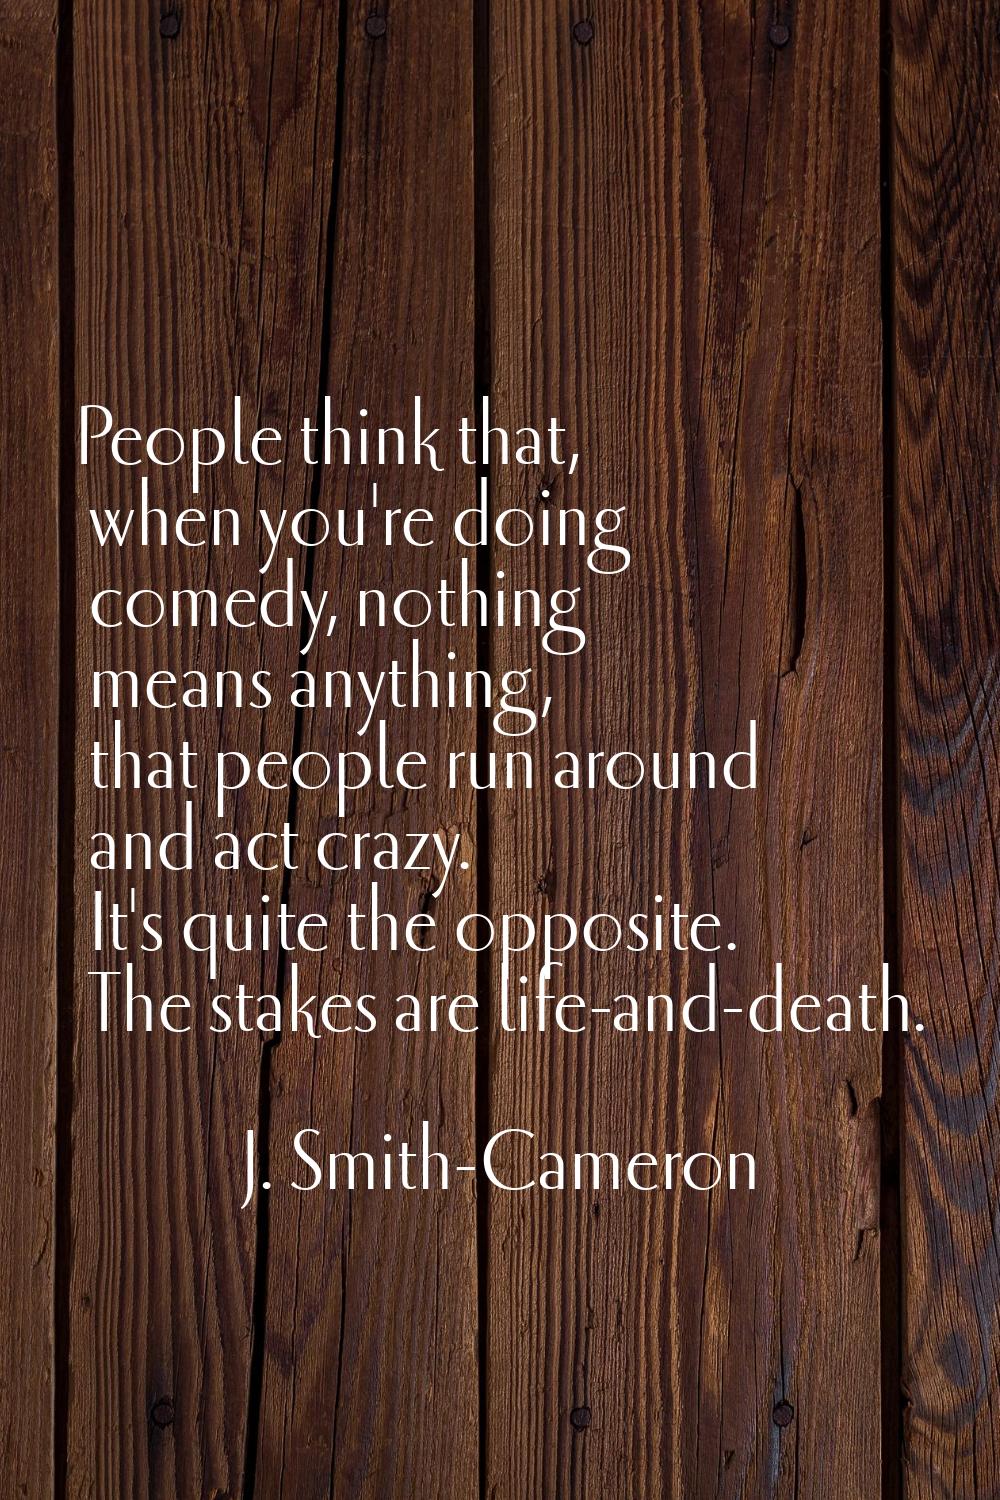 People think that, when you're doing comedy, nothing means anything, that people run around and act